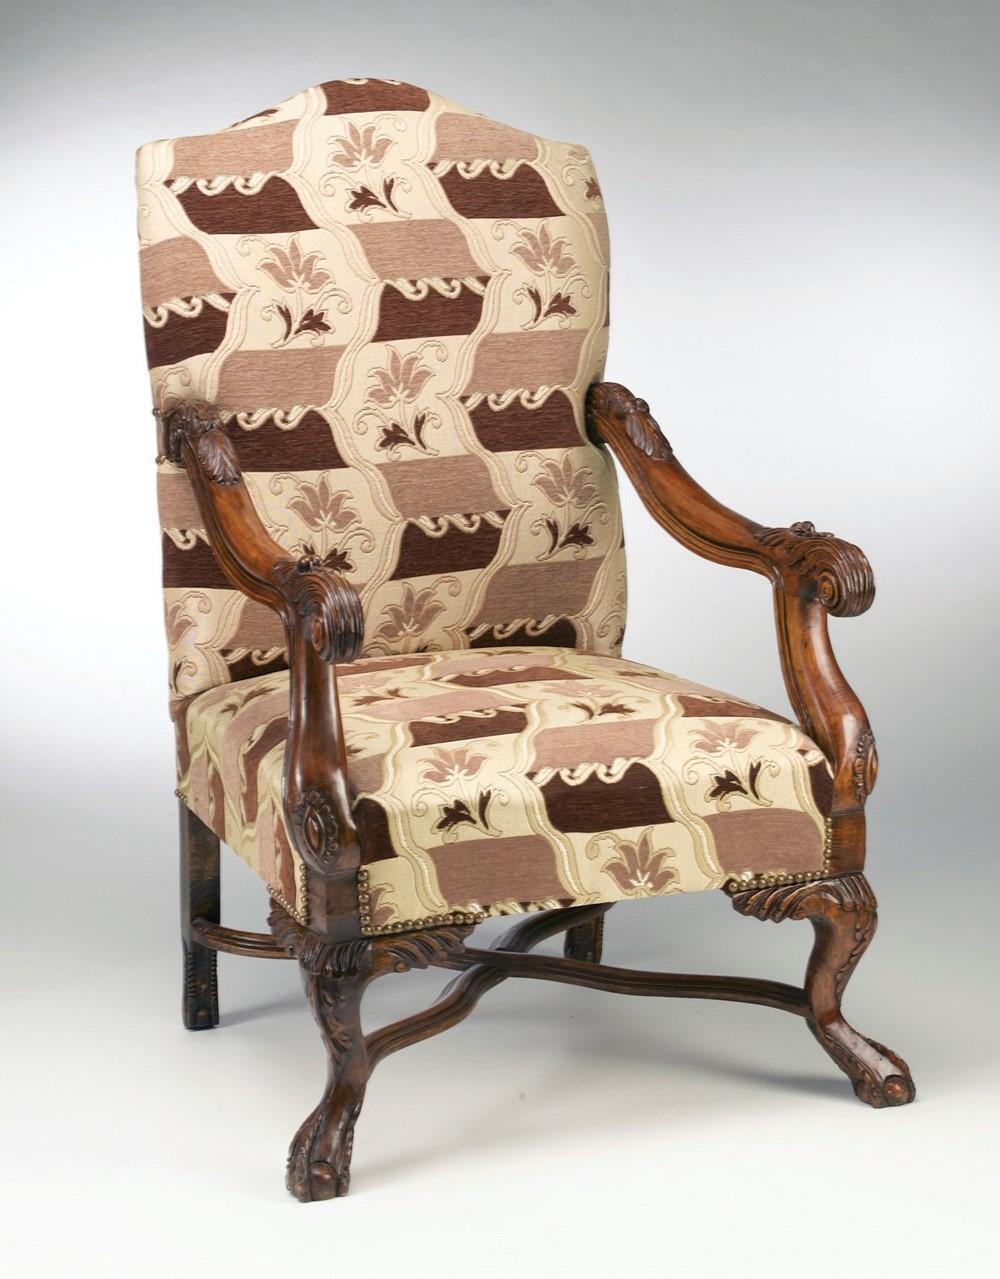 Classic, Traditional Arm Chairs 73049 AA- 73049-ACH-Set-4 in Multi-Color Patterned, Brown, Beige Fabric